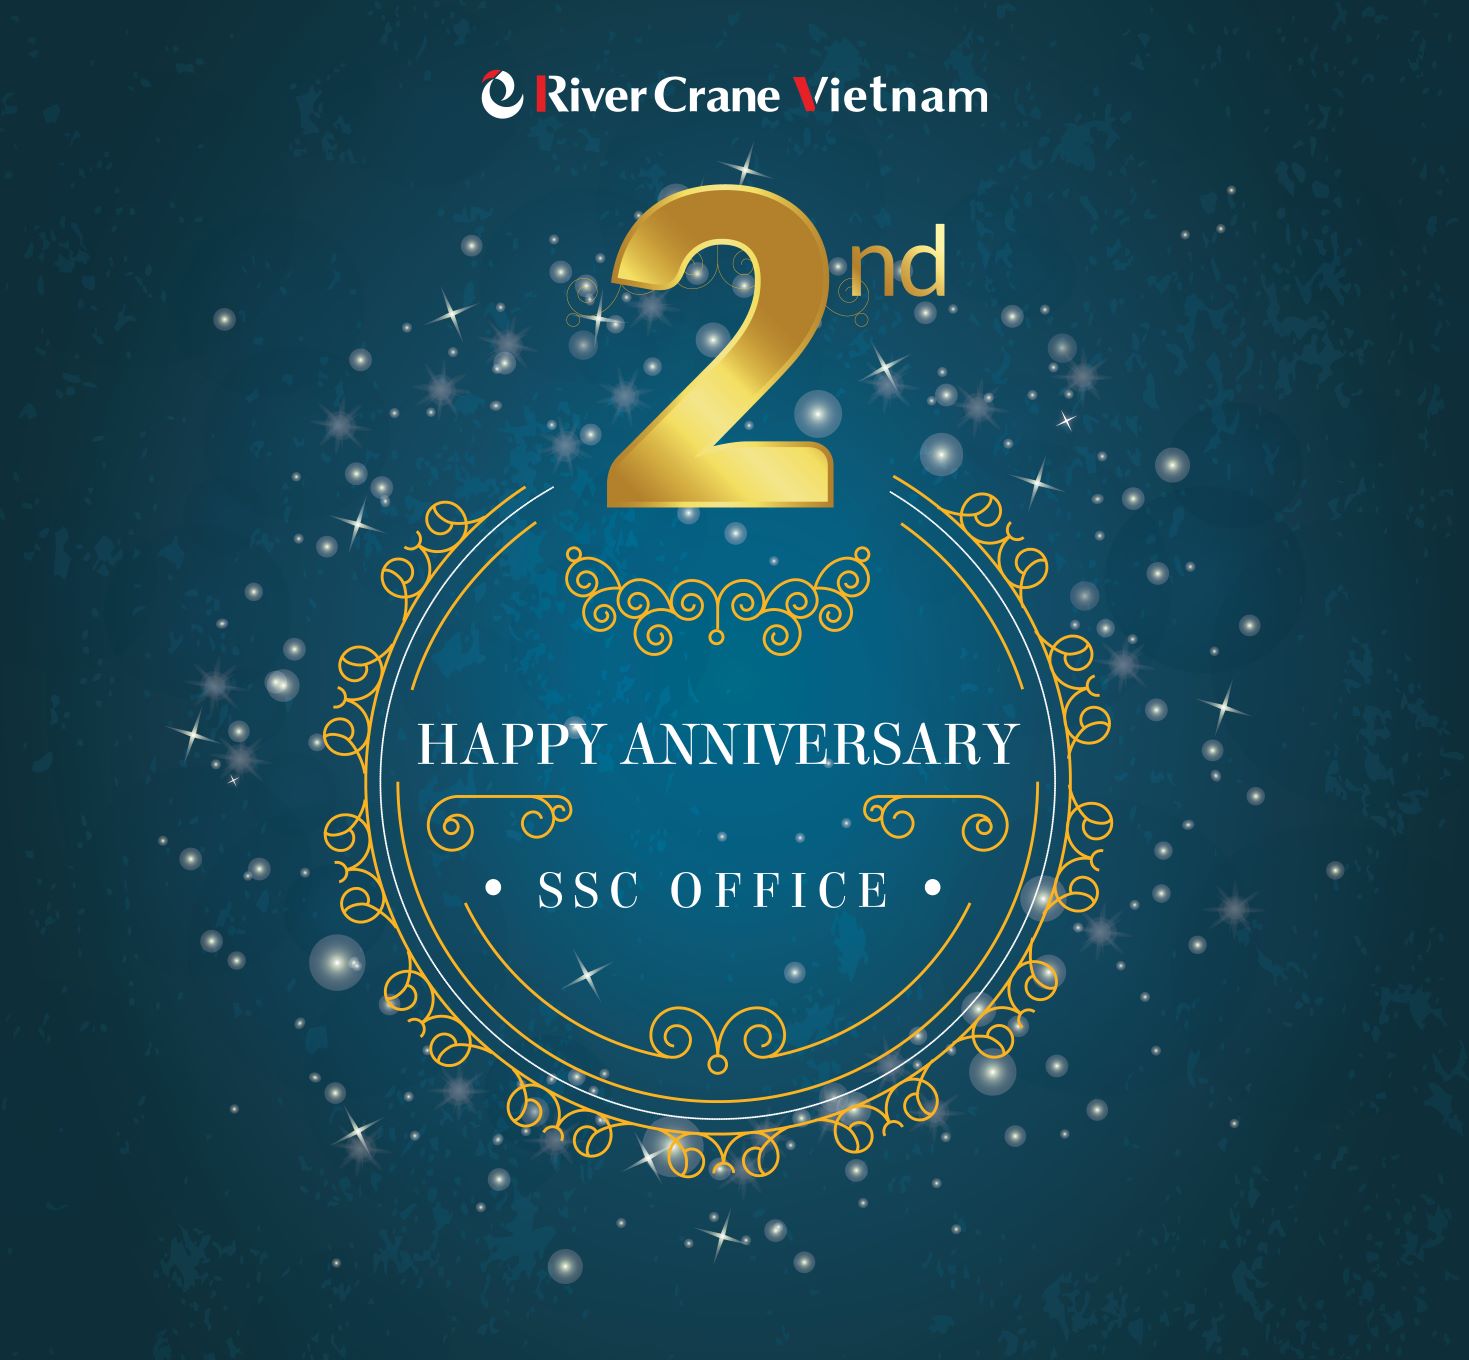 Happy SSC office’s 2nd anniversary